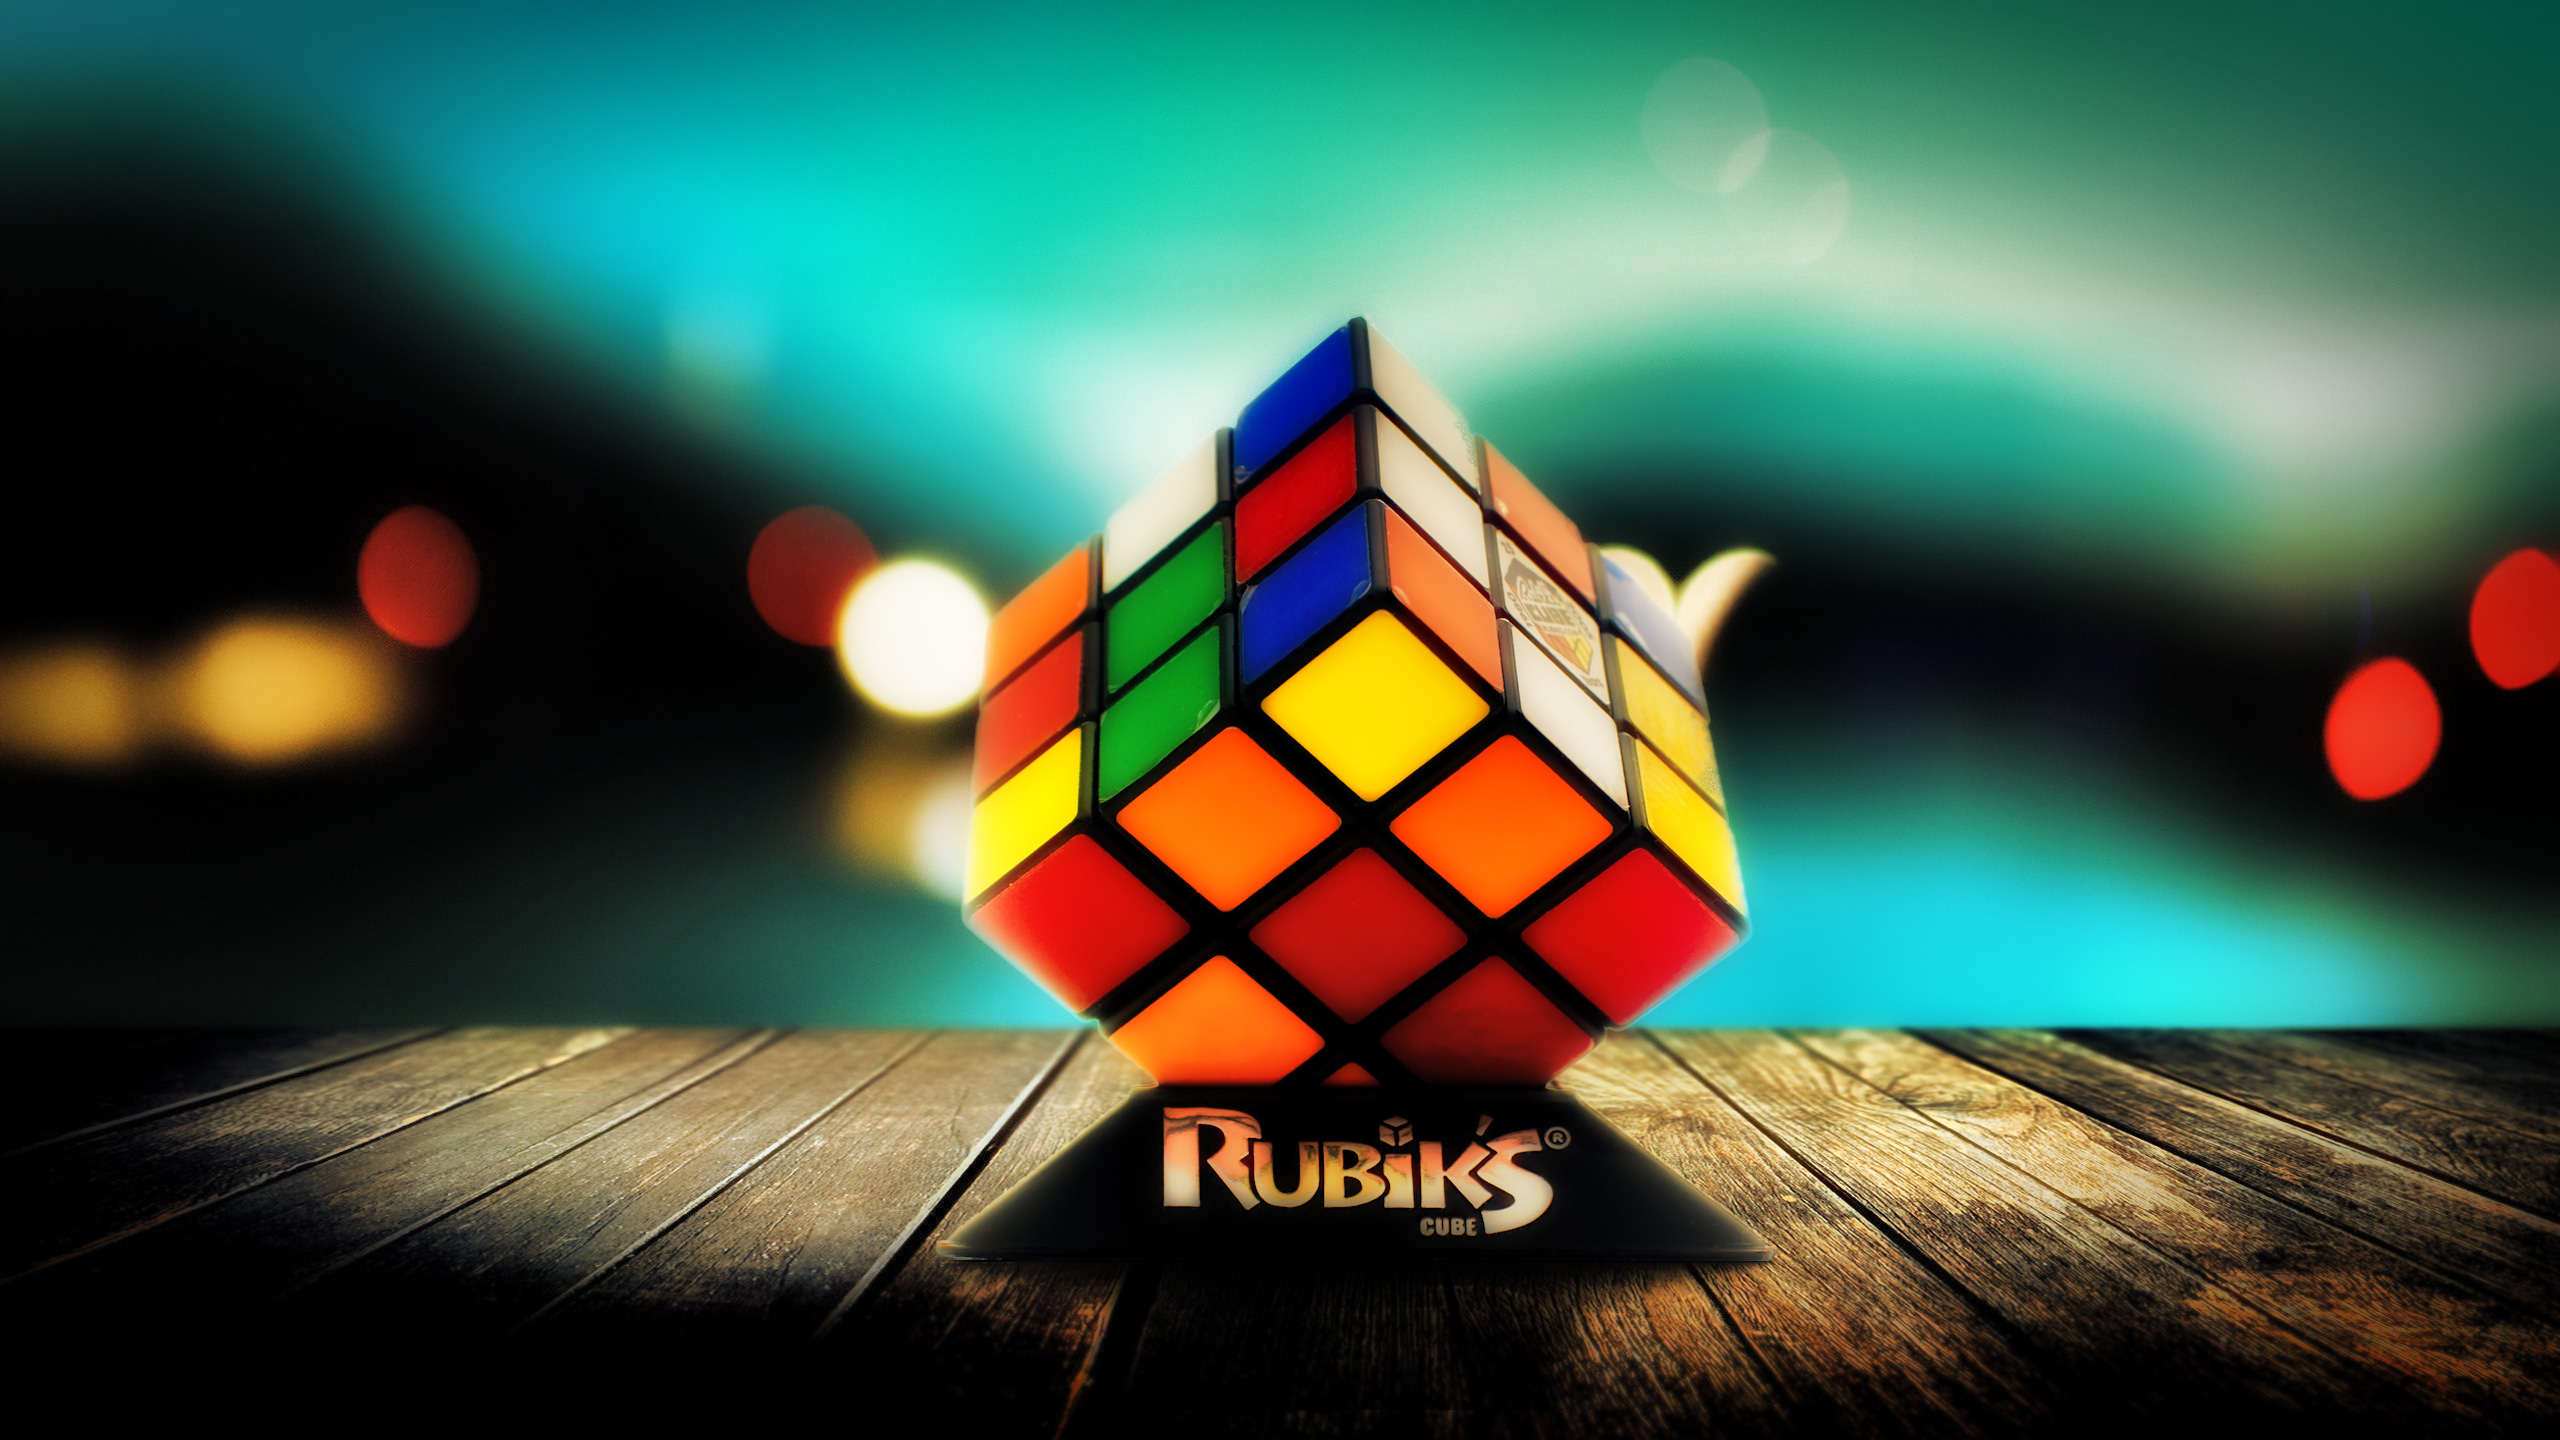 What Can We Learn from the Rubiks Cube about Leadership 2560x1440